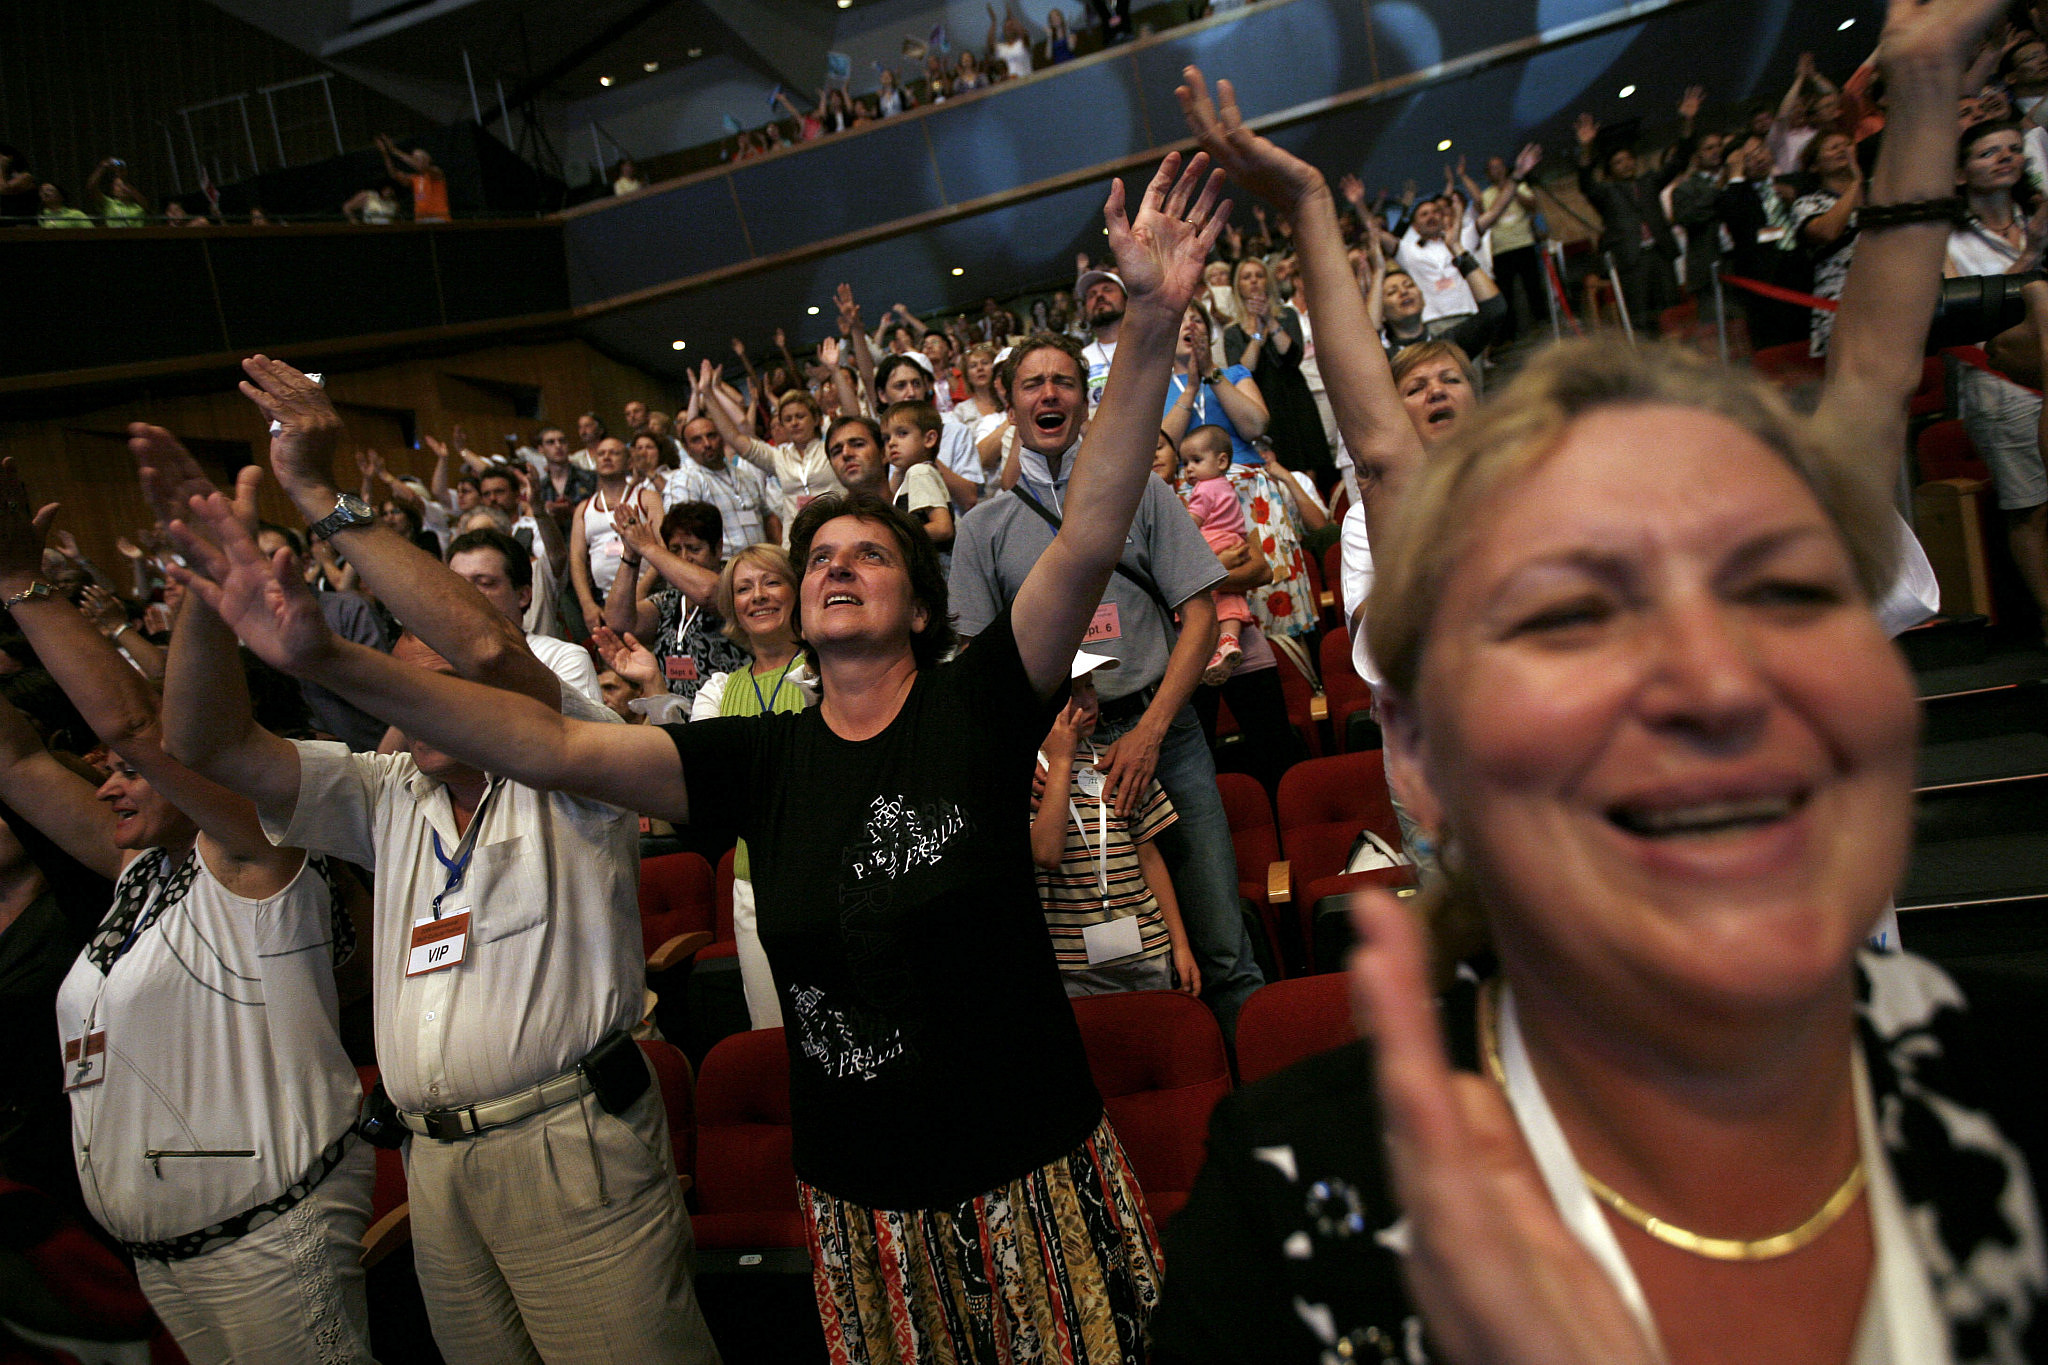 About 3000 evangelical Christian Israeli supporters from all over the world attend a festival at the International Conference Center in Jerusalem, September 6, 2009. (Miriam Alster/Flash90)